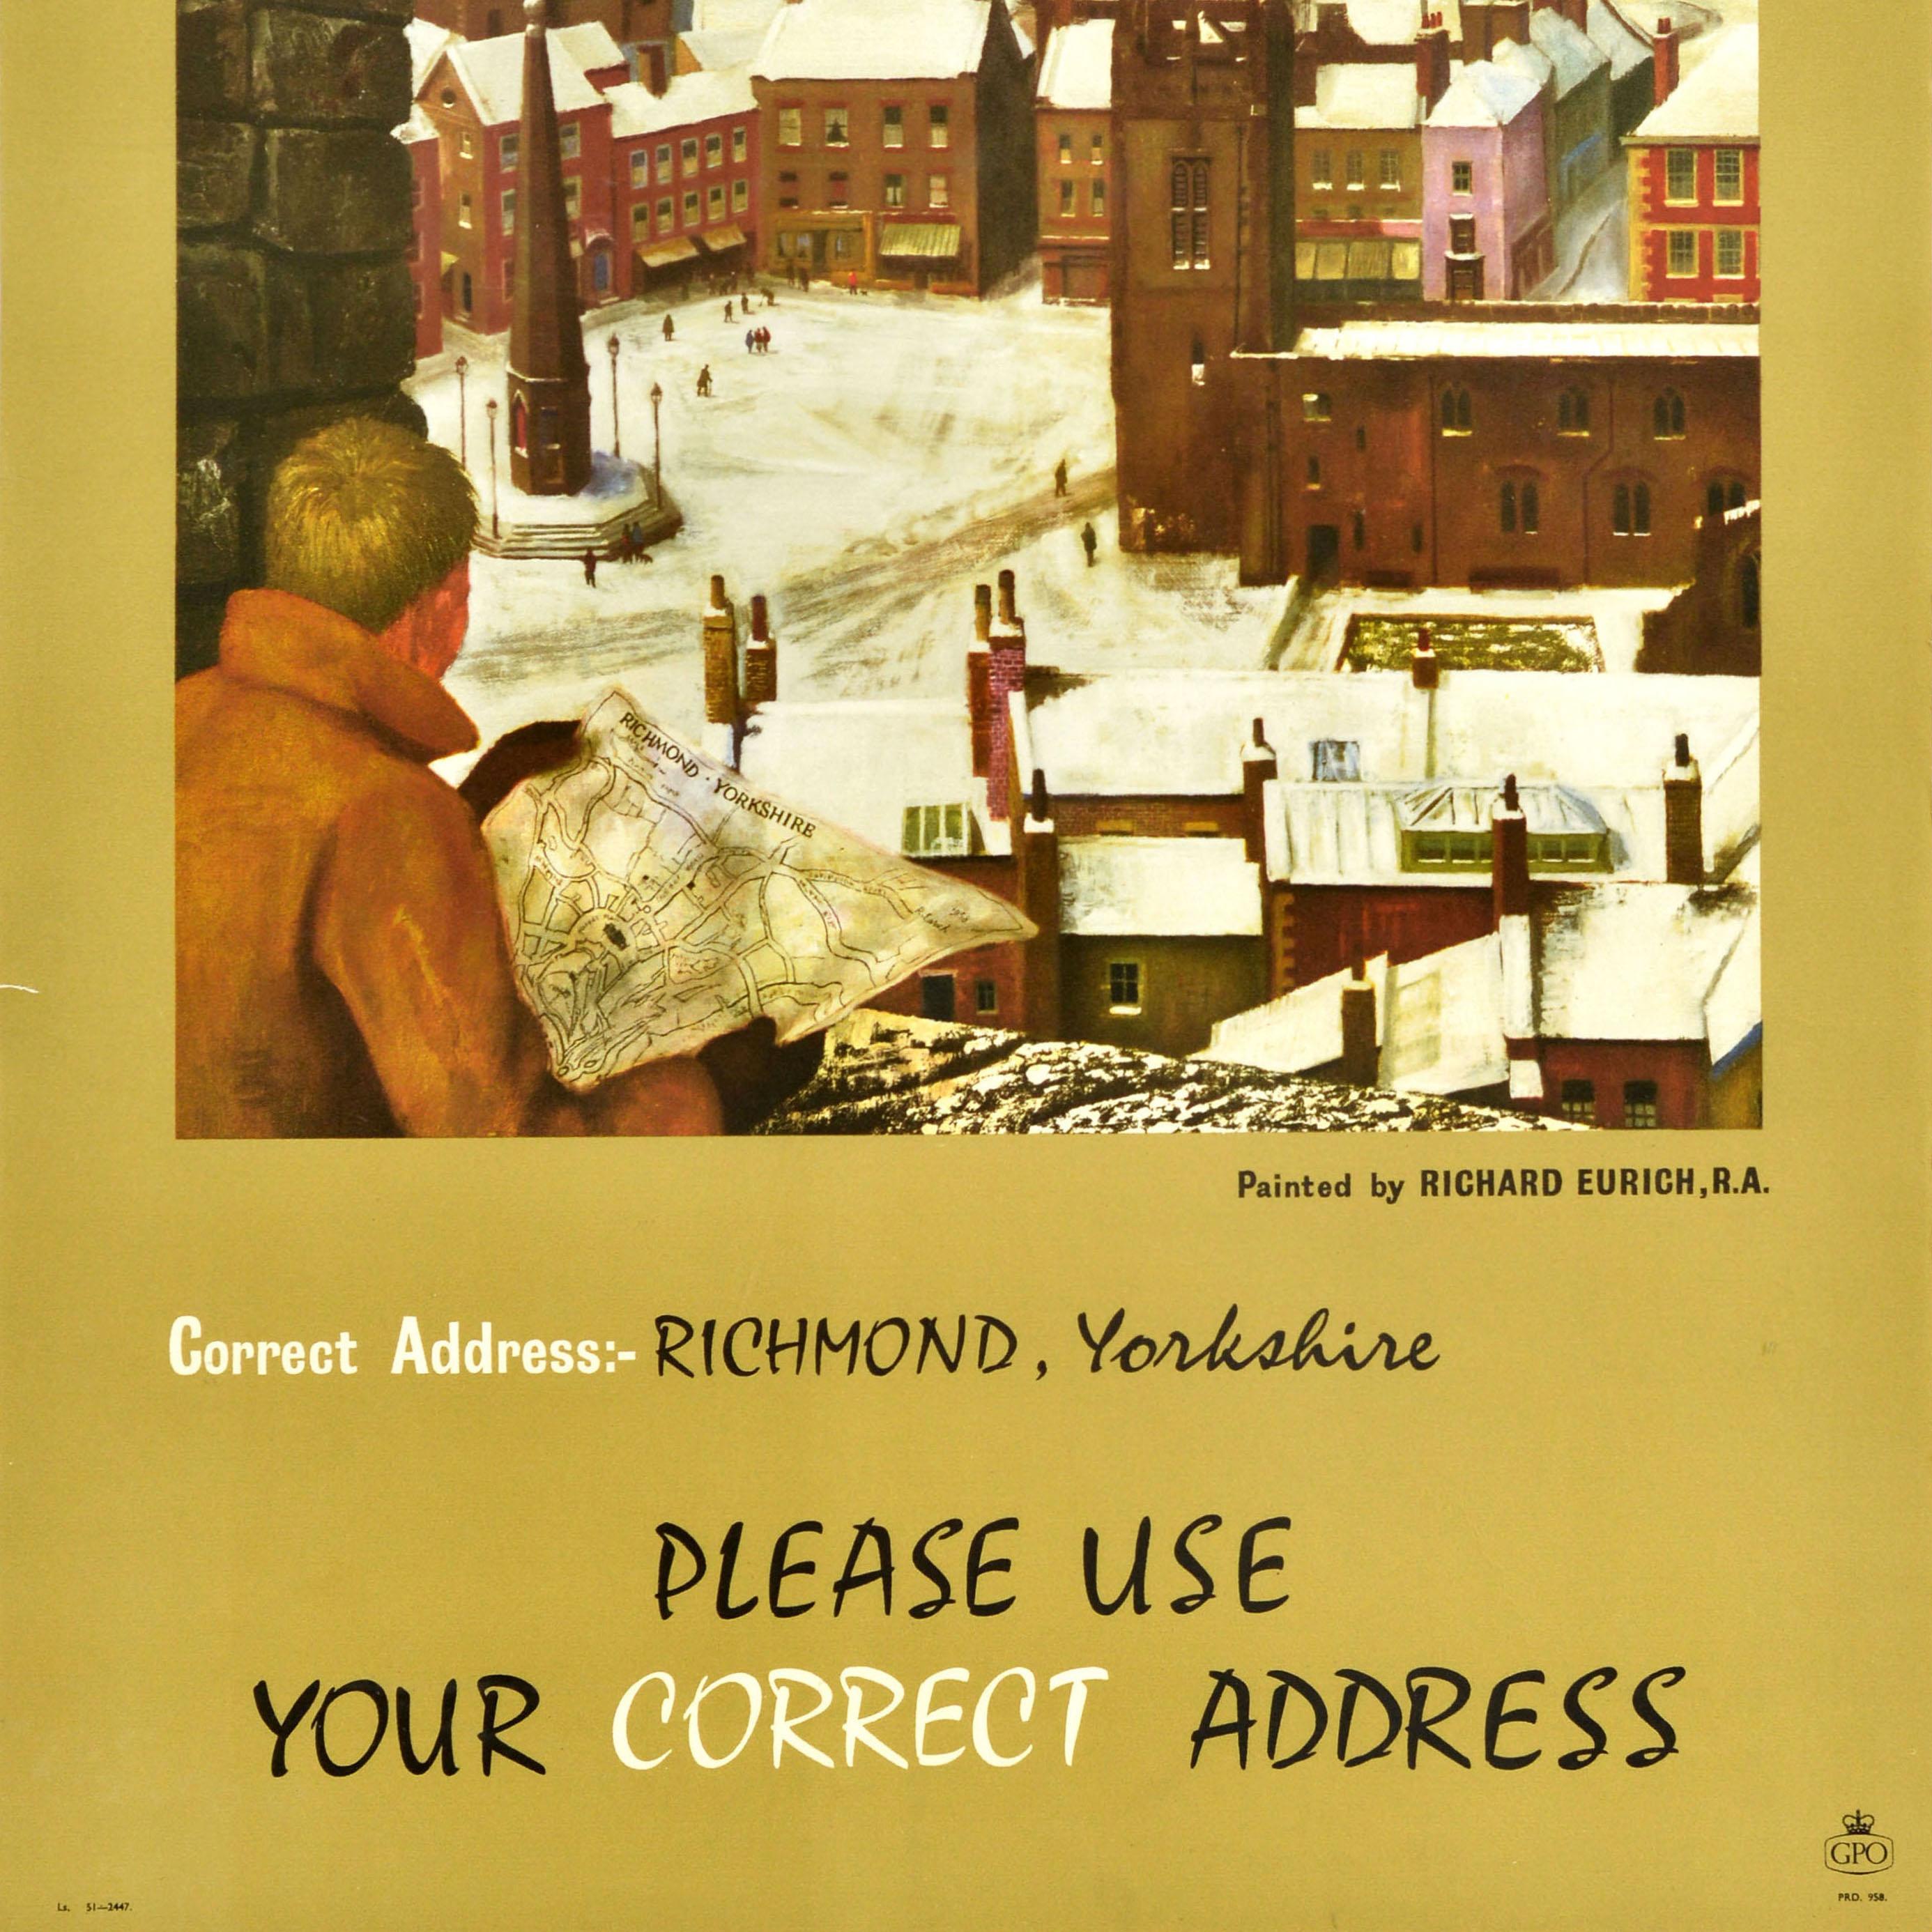 Original vintage post office advertising poster featuring a great artwork by a British artist Richard Eurich (1903-1992) depicting a man looking at the map of Richmond with the city below, the caption below the image reads - Correct Address: